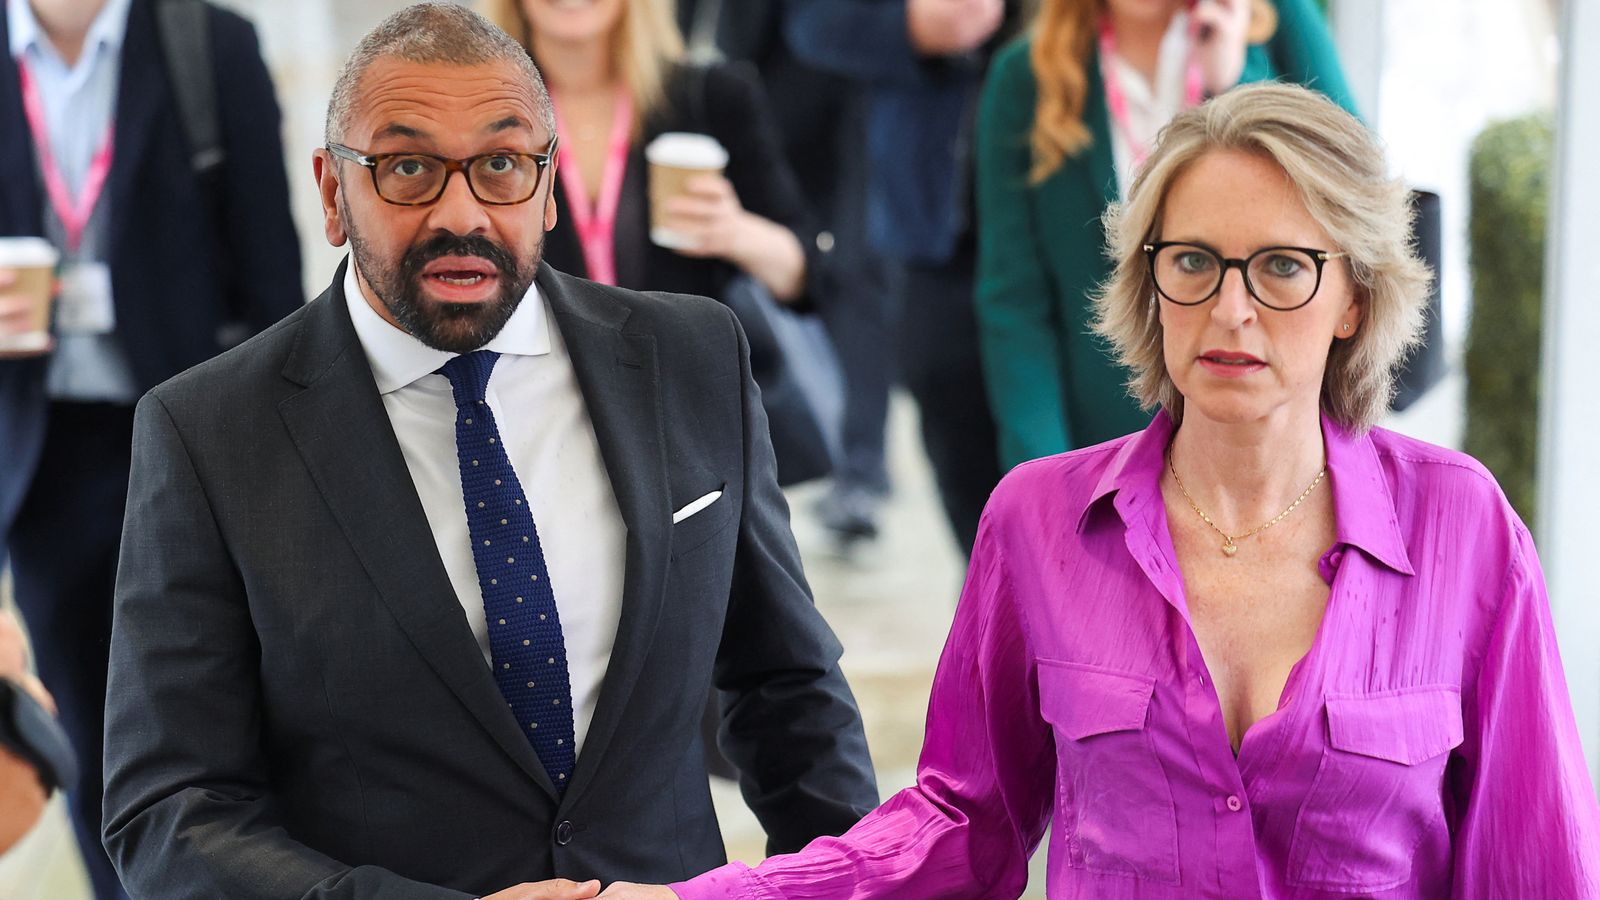 Home Secretary James Cleverly's date rape joke 'misogynistic' and 'very ill-judged', senior Tory MP says